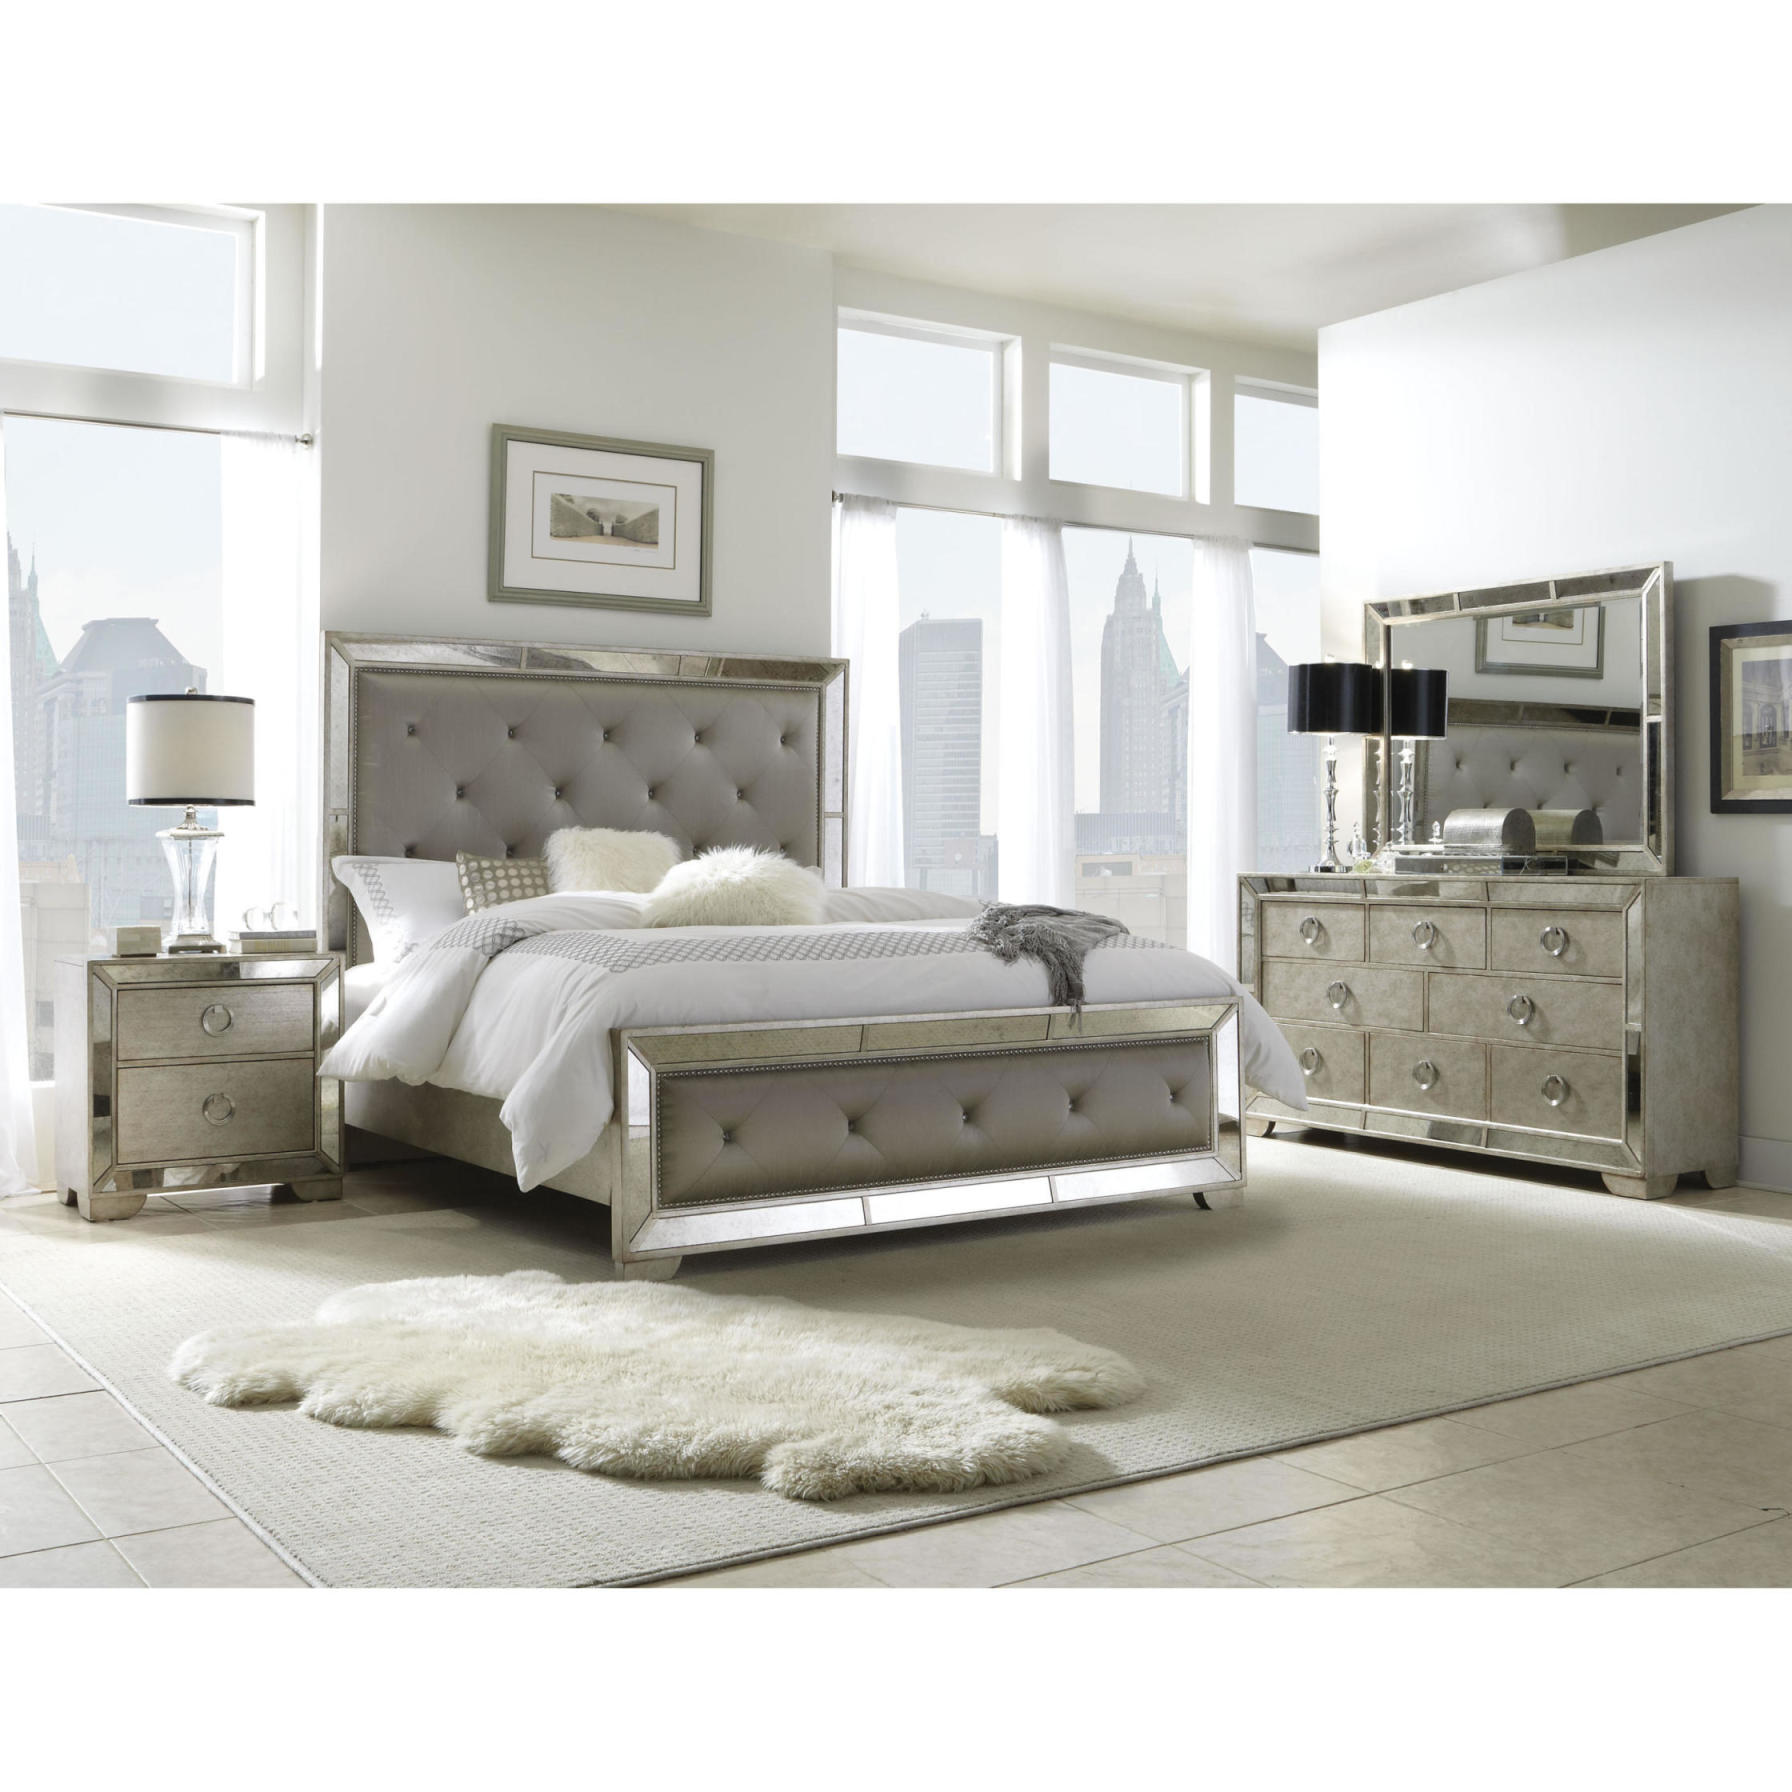 Mirrored Cabinets Bedroom-Mirrored Bedroom Furniture Mirrored Glass Chest  Of Drawers